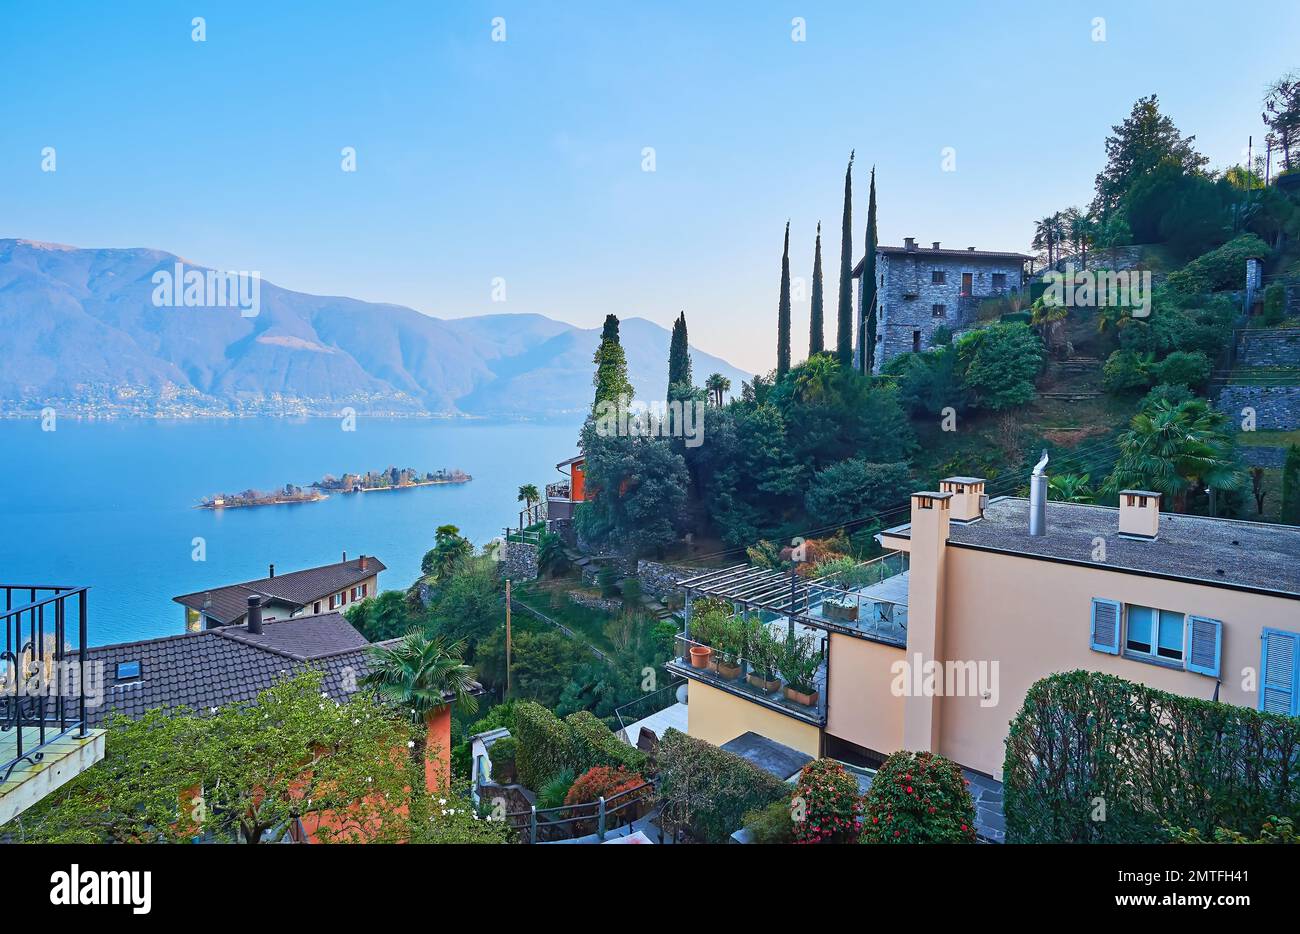 The blooming terrace gardens on the mountain slope against blue waters of Lake Maggiore, Brissago Islands and hazy Alps, Ronco sopra Ascona, Switzerla Stock Photo